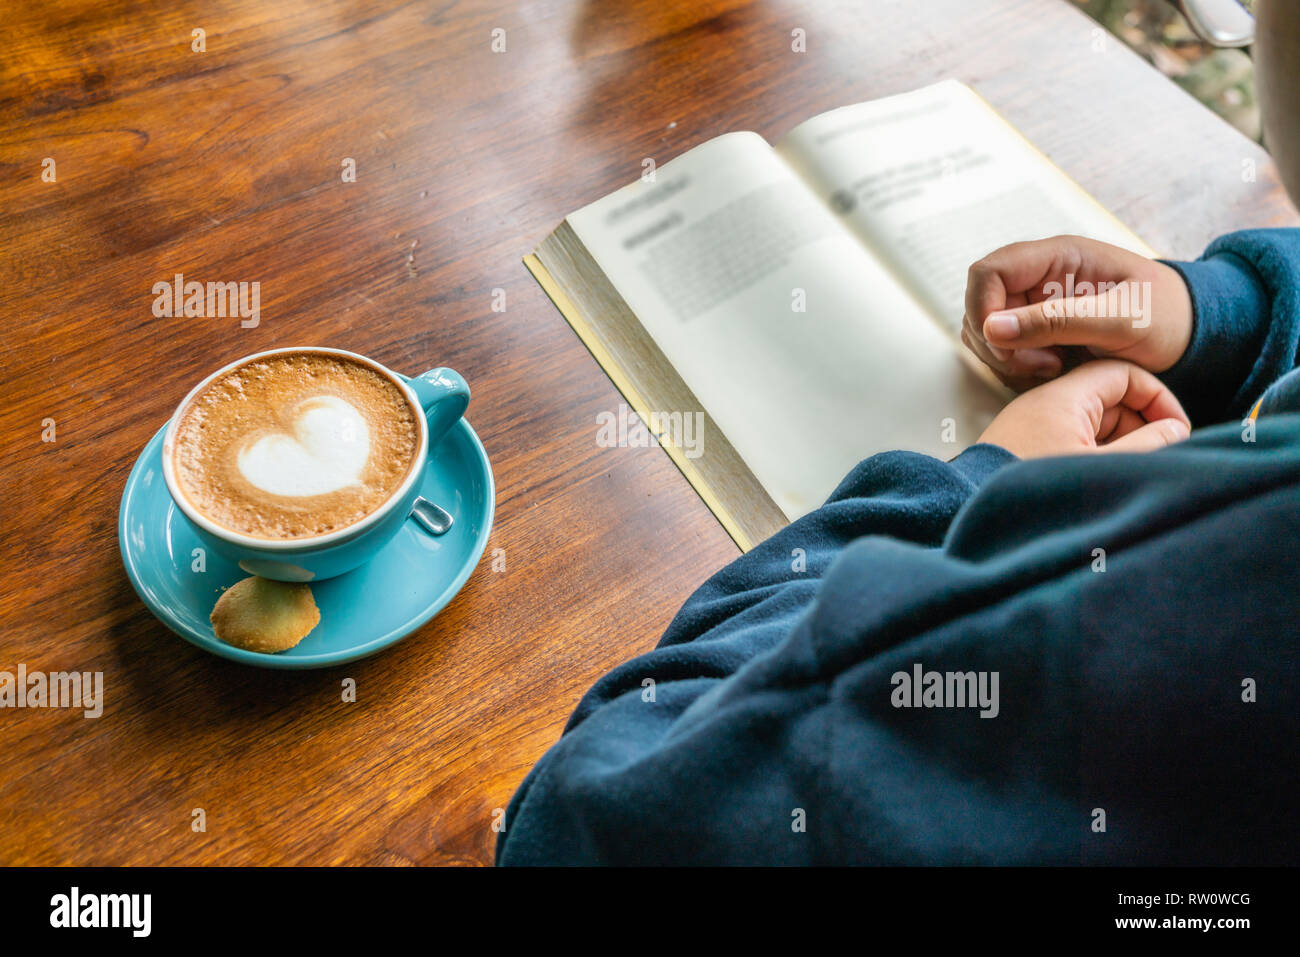 Woman hand reading book and drinking coffee Stock Photo